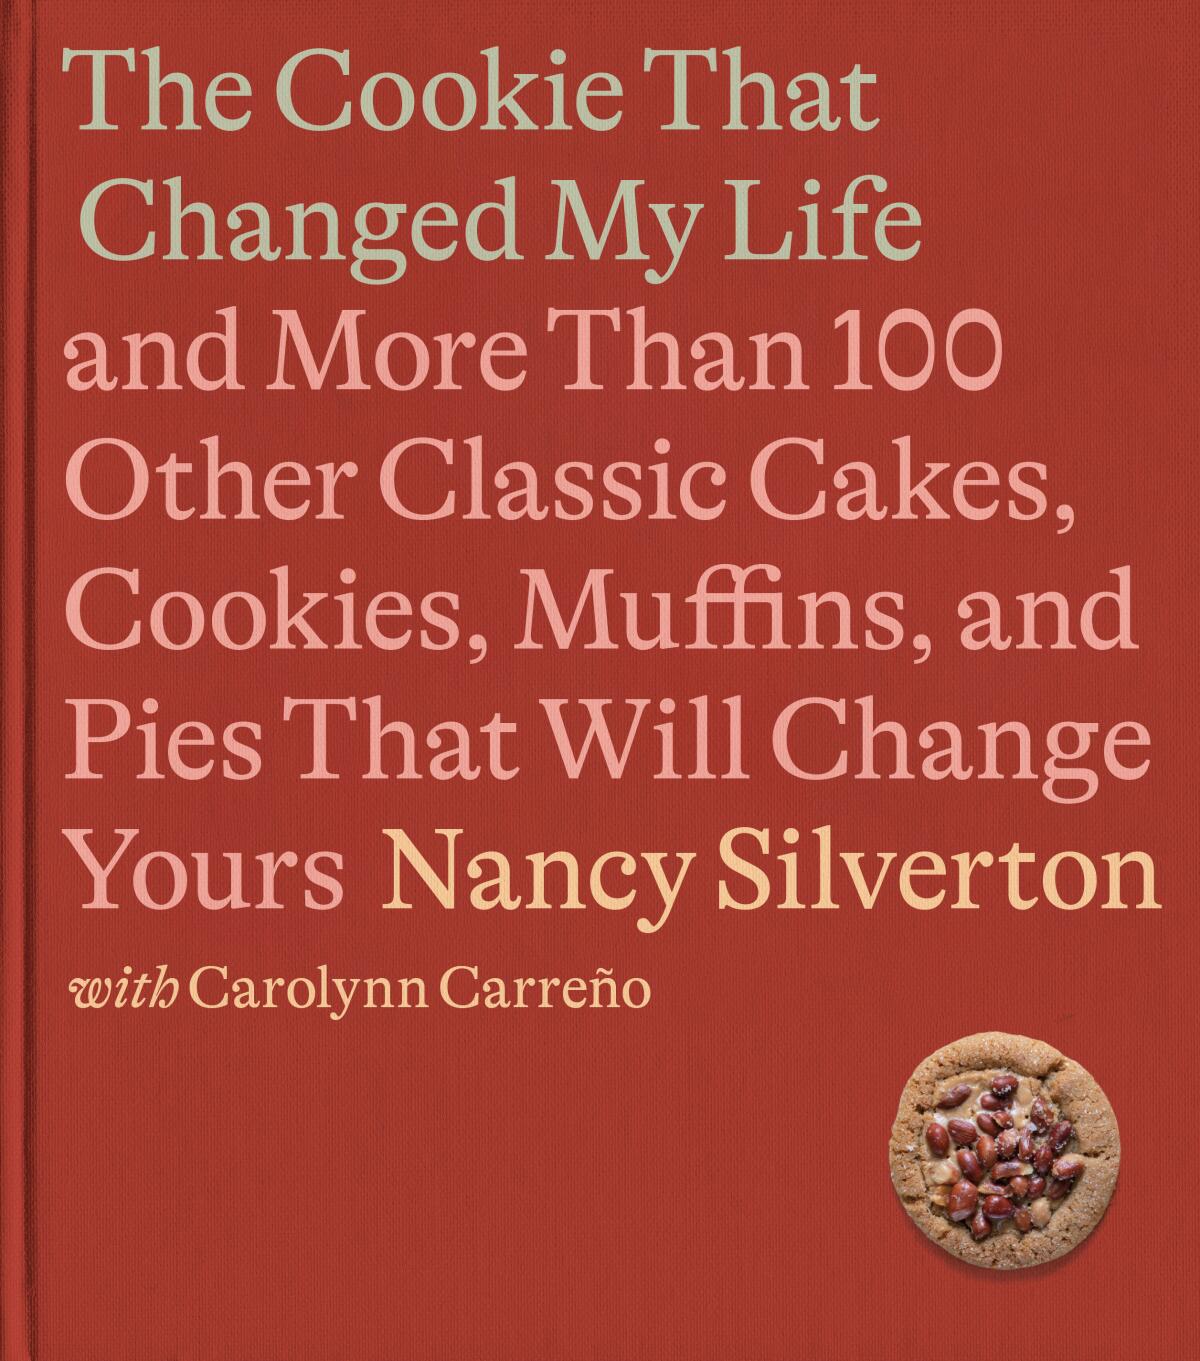 The Cookie That Changed My Life by Nancy Silverton with Carolynn Carreño (Knopf)